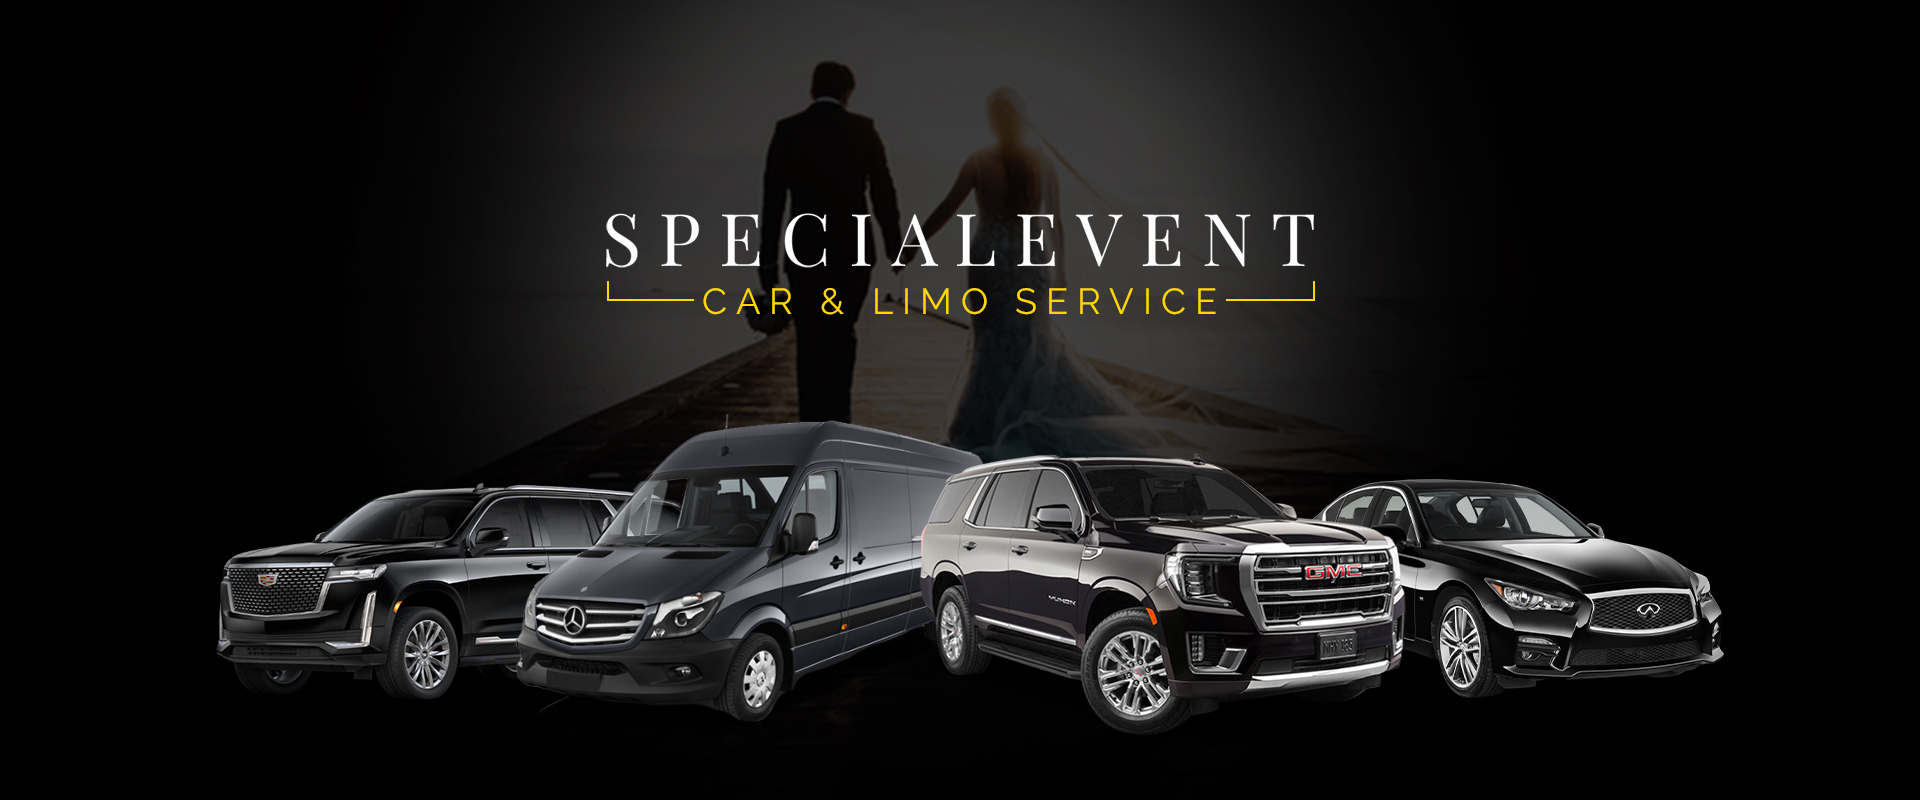 Special Events Car & Limo Service - Trustee Transportation